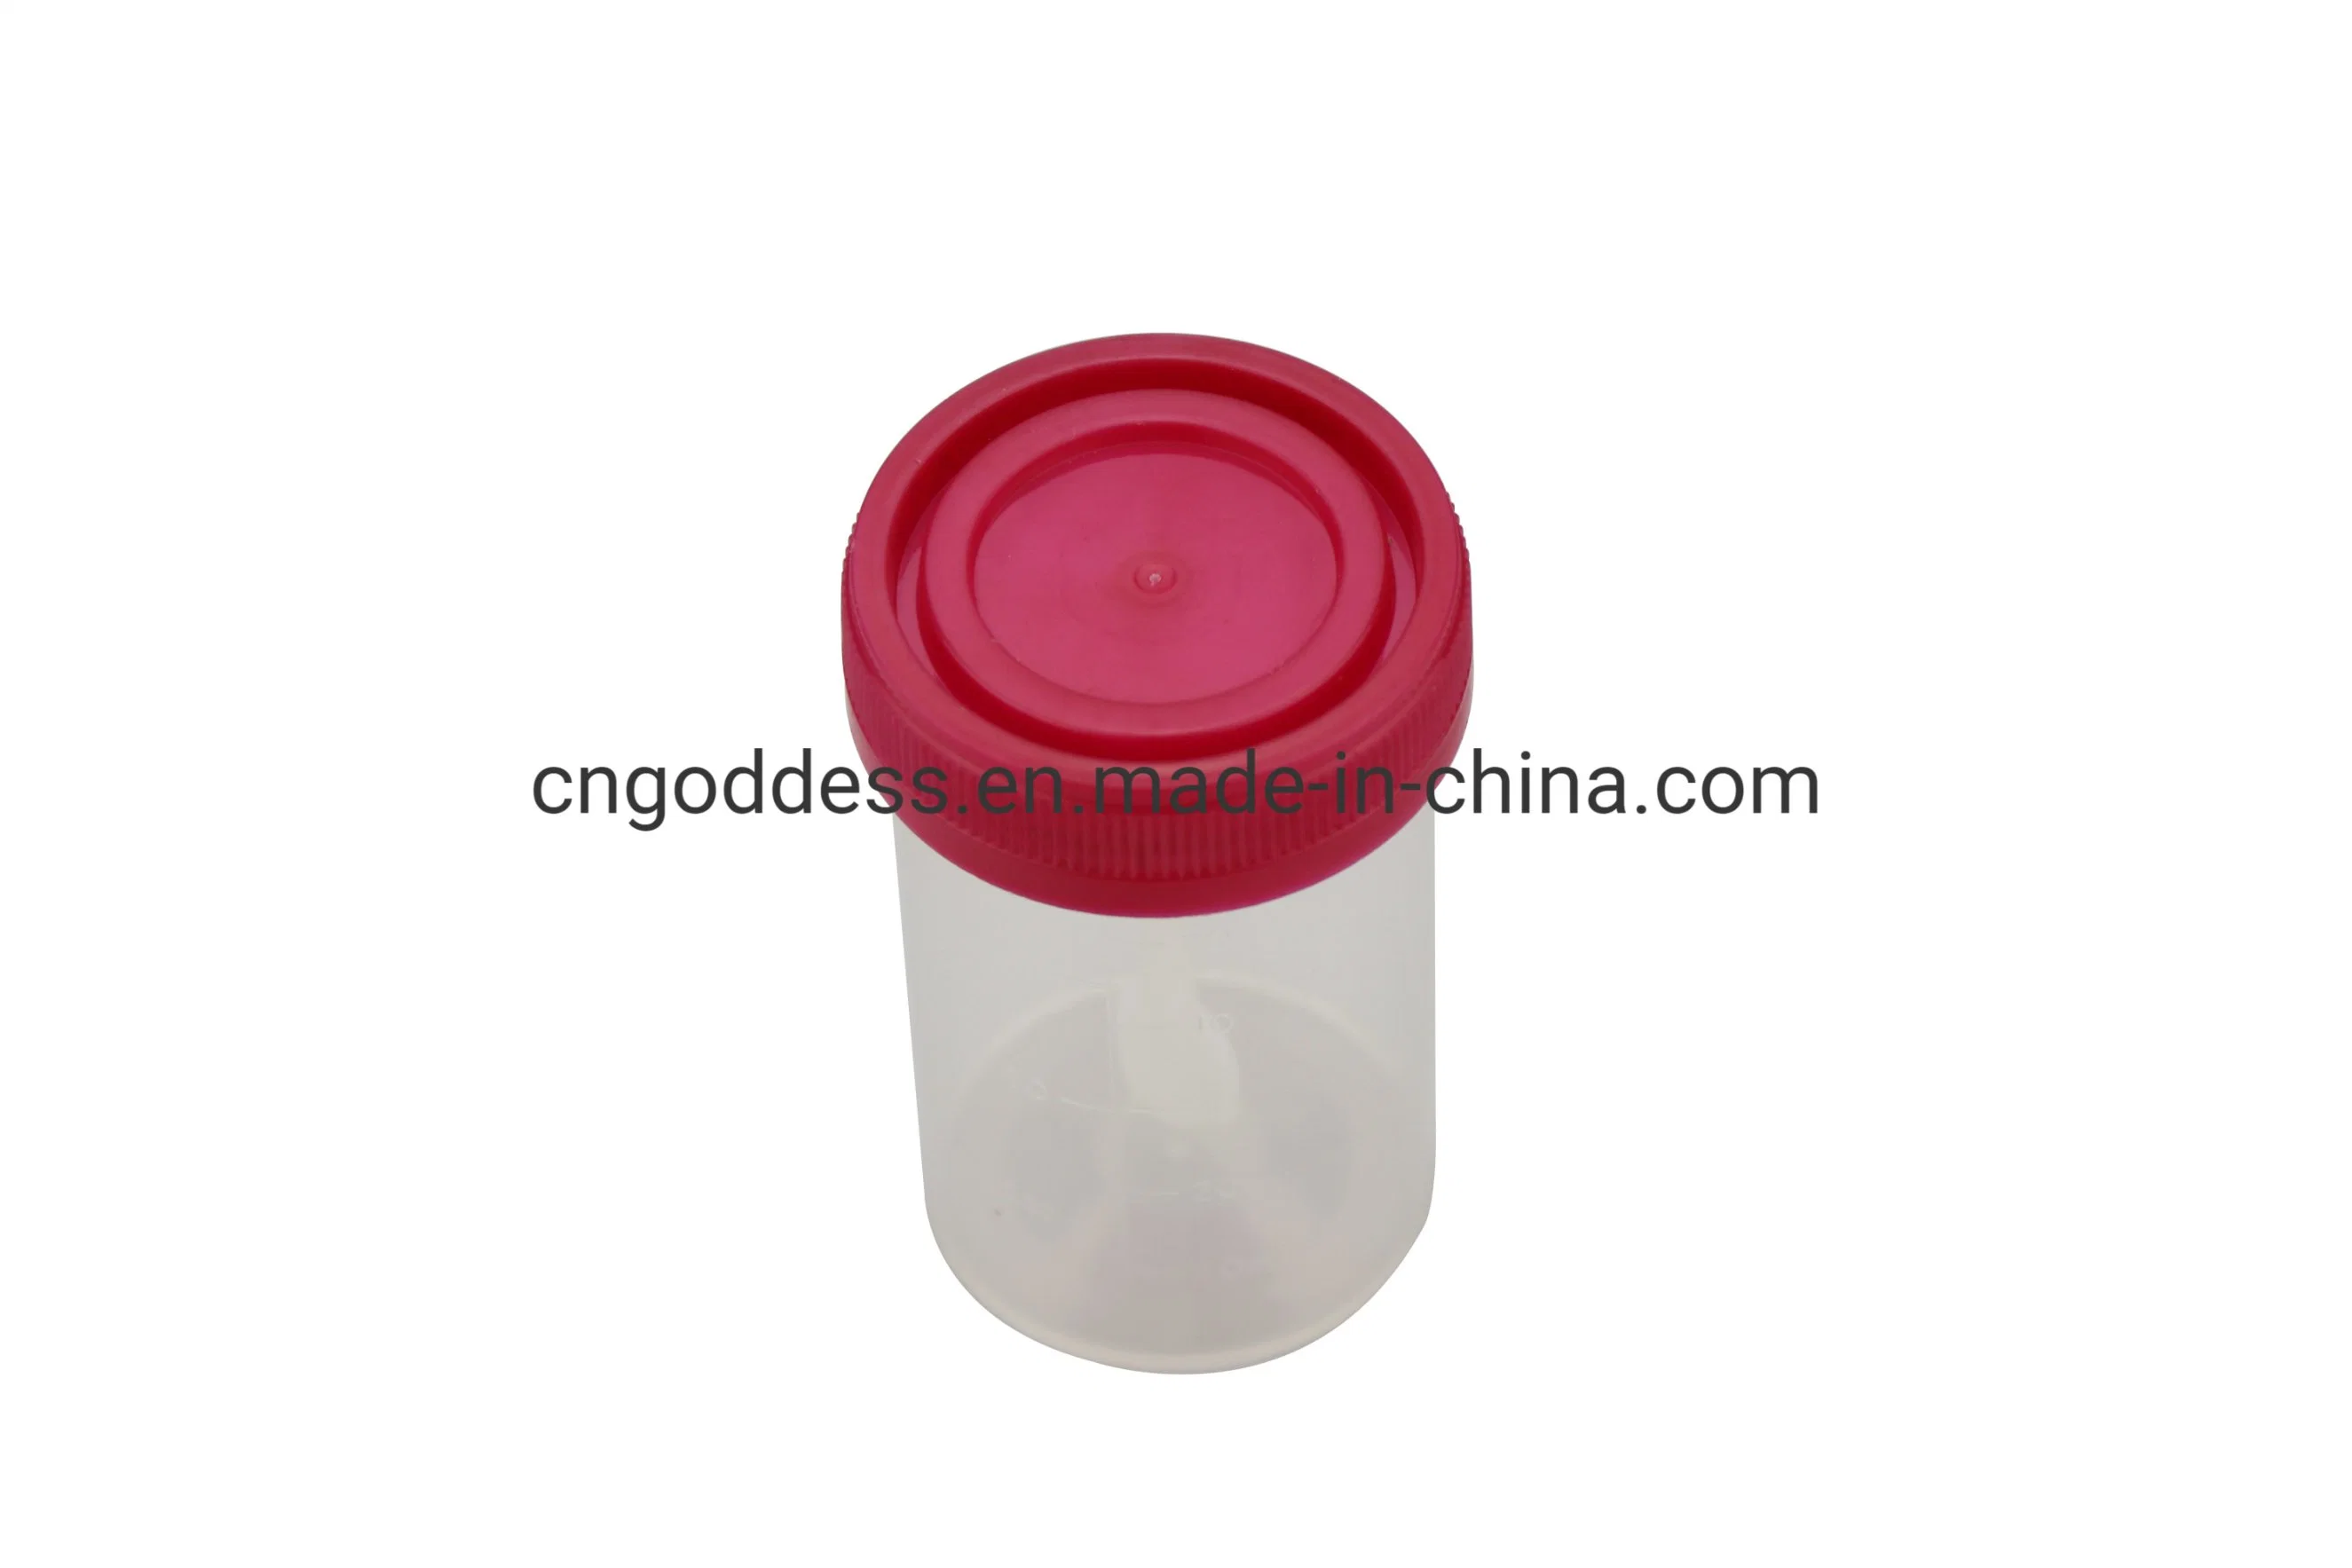 Medical Screw Cap 30ml Urine and Stool Collection Container